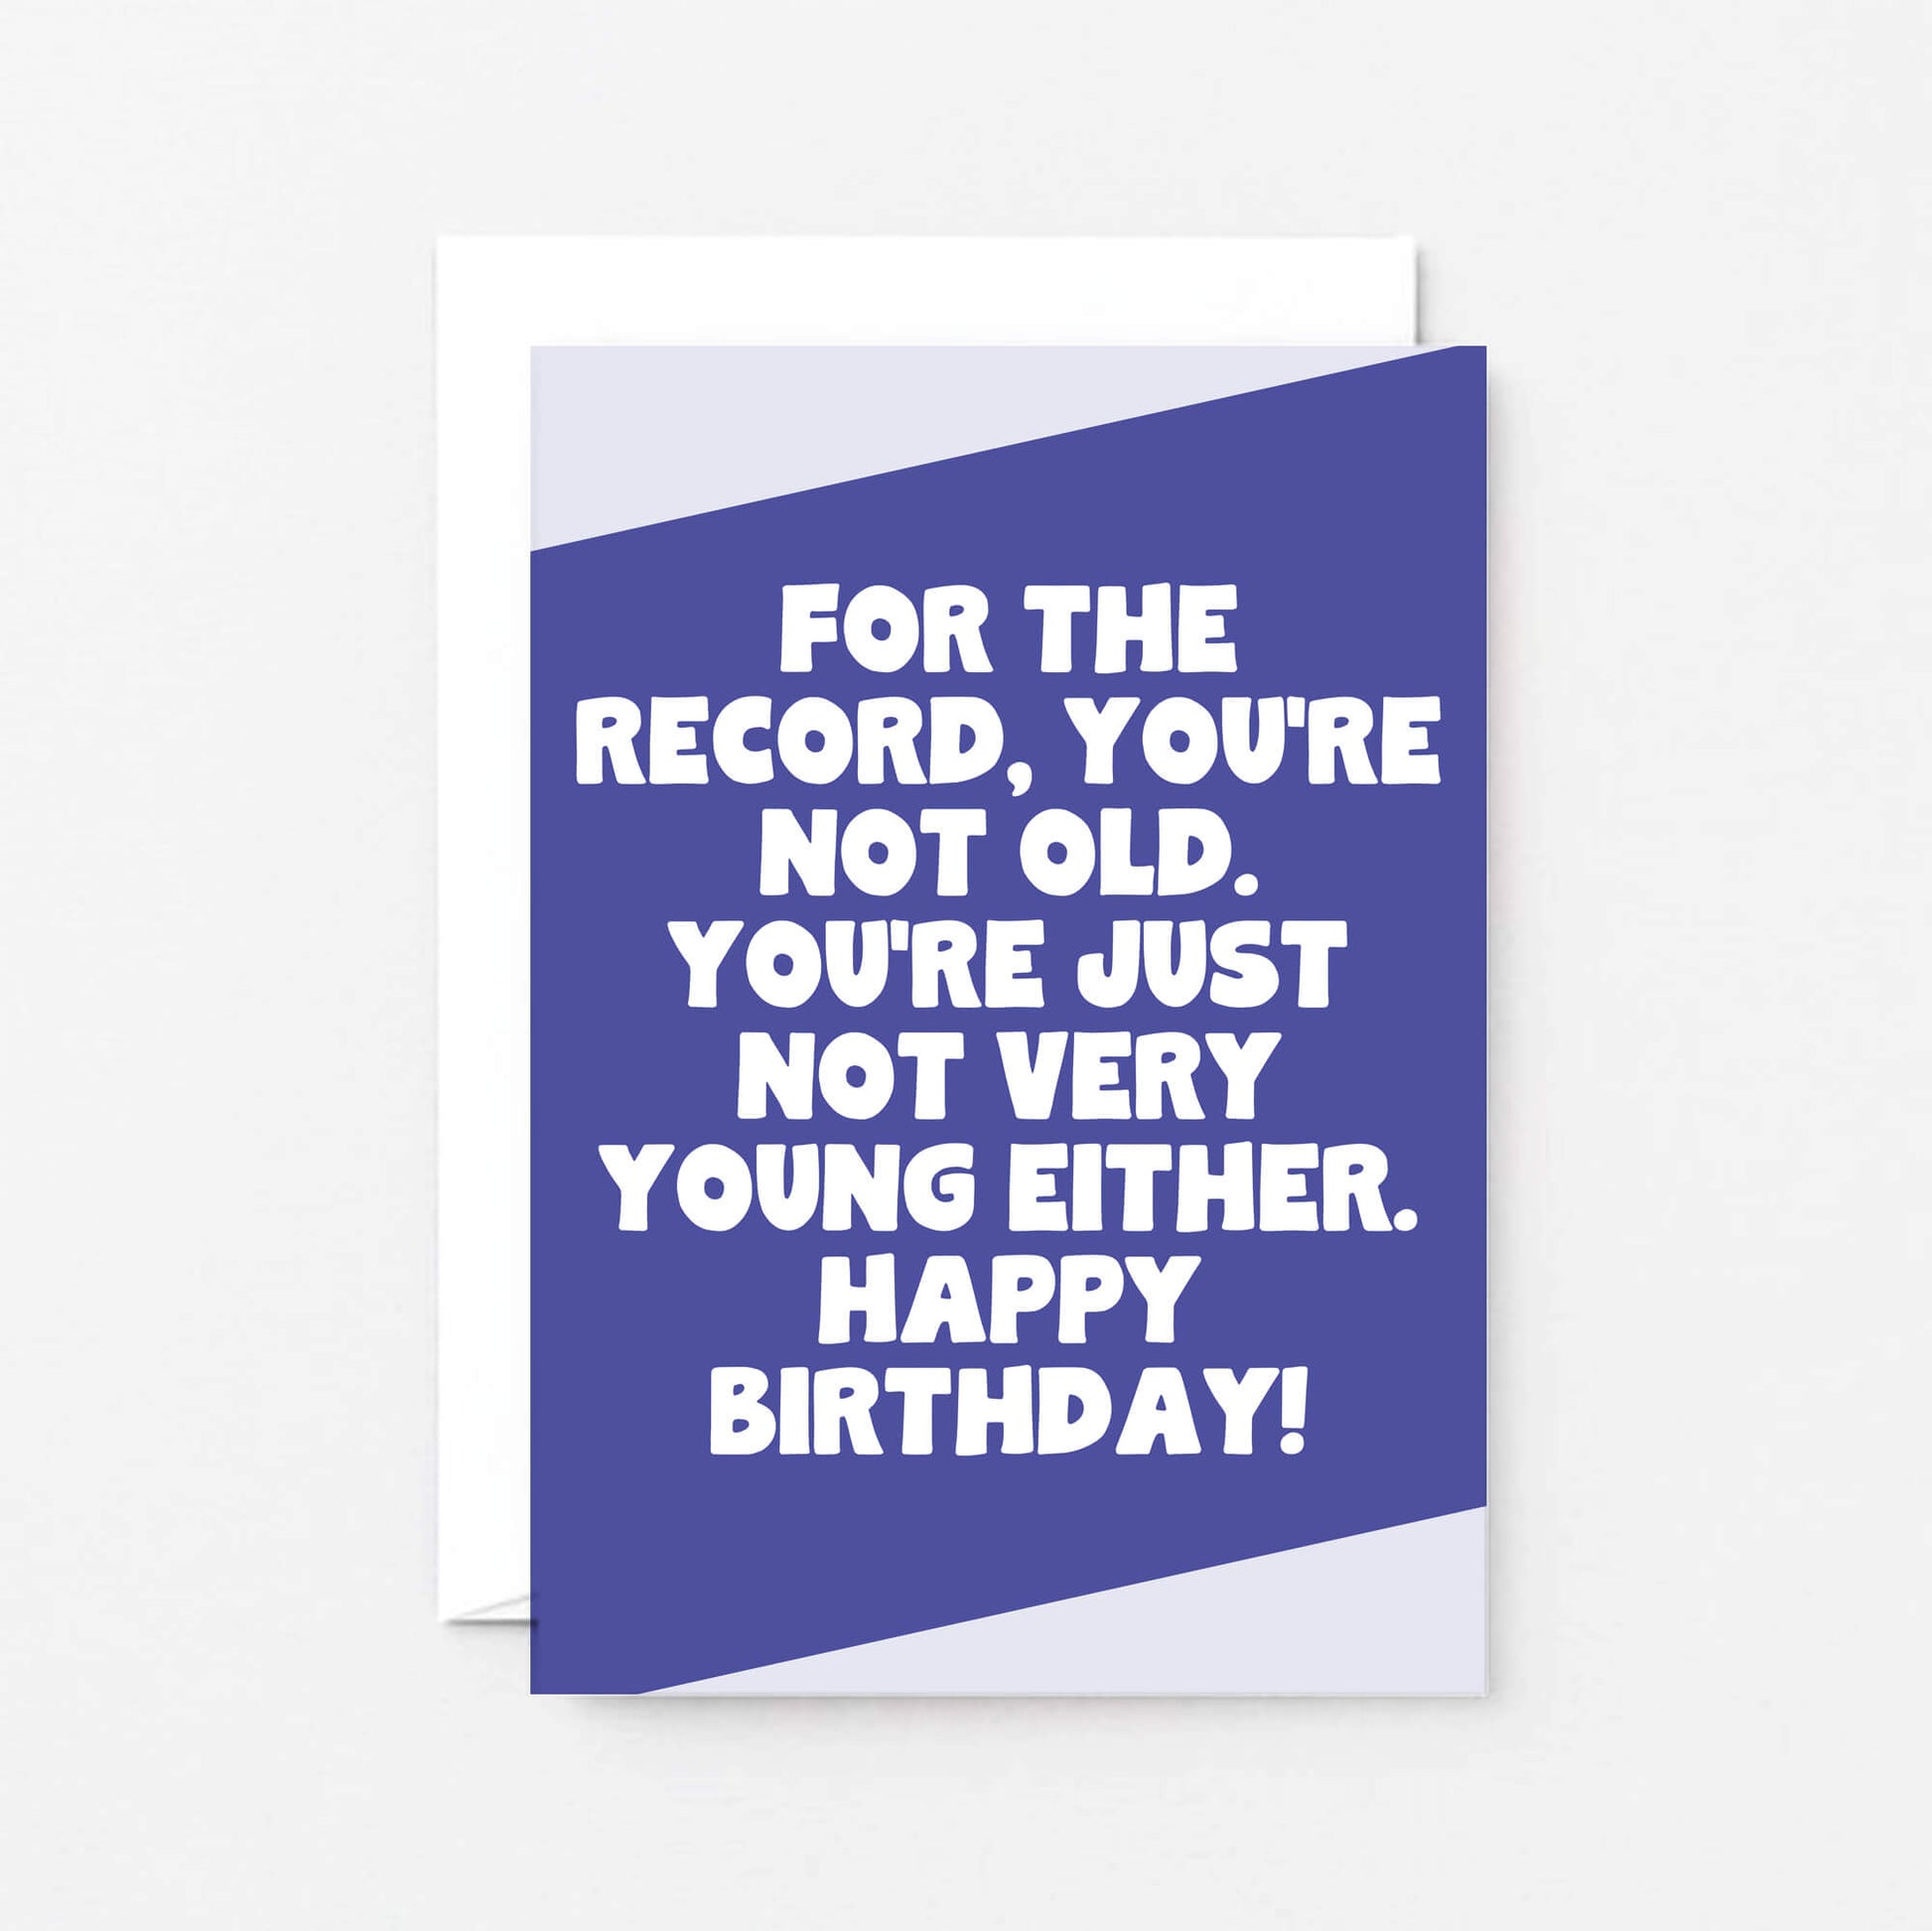 Birthday Card by SixElevenCreations. Reads For the record, you're not old. You're just not very young either. Happy birthday! Product Code SE3073A6